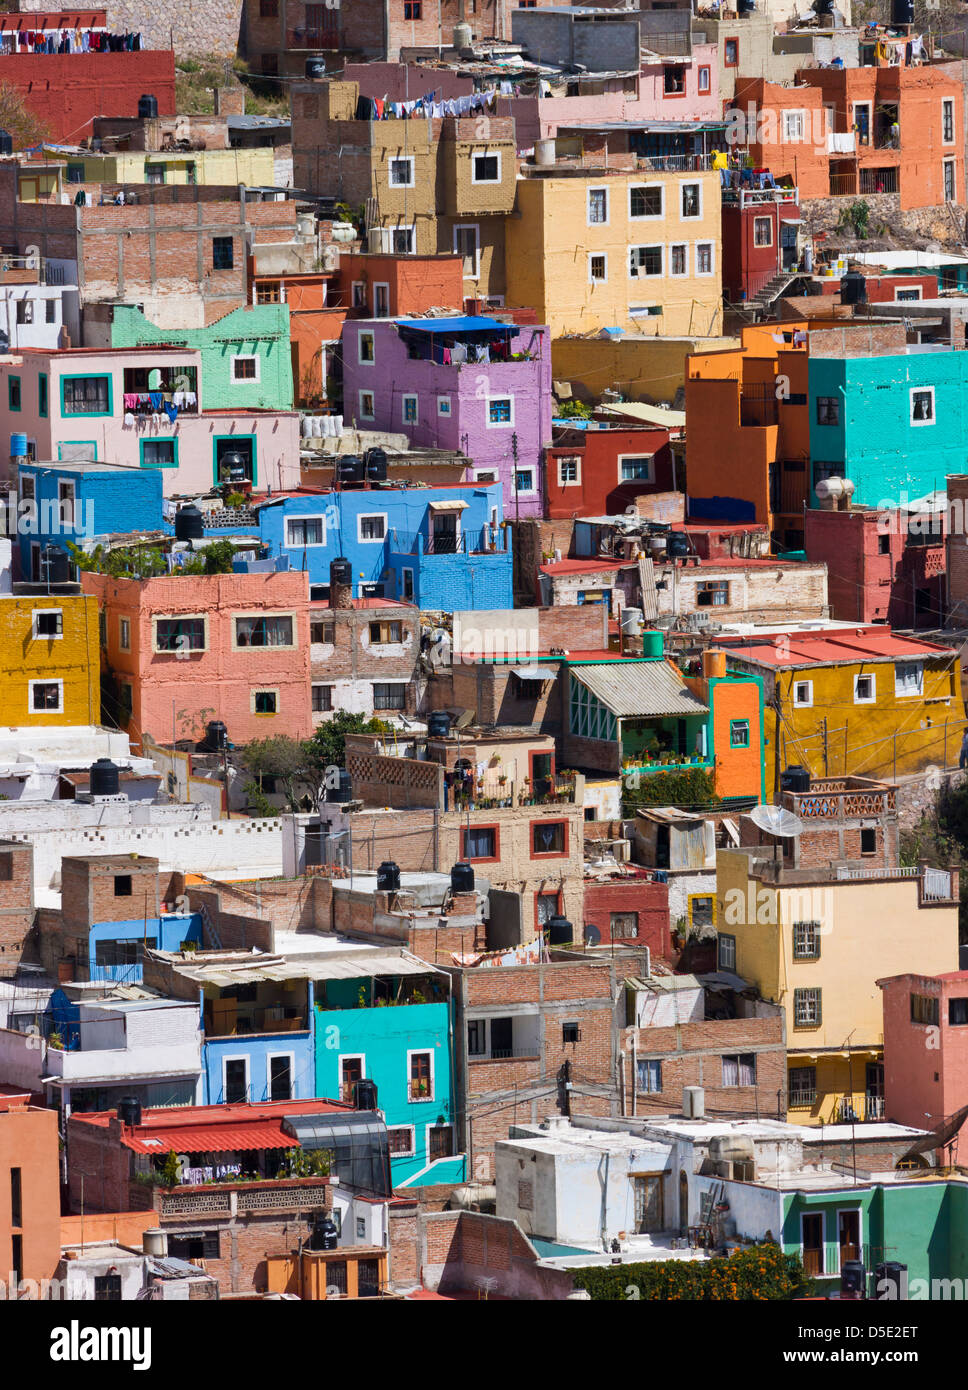 Aerial view of colorful houses of Guanajuato, Mexico Stock Photo